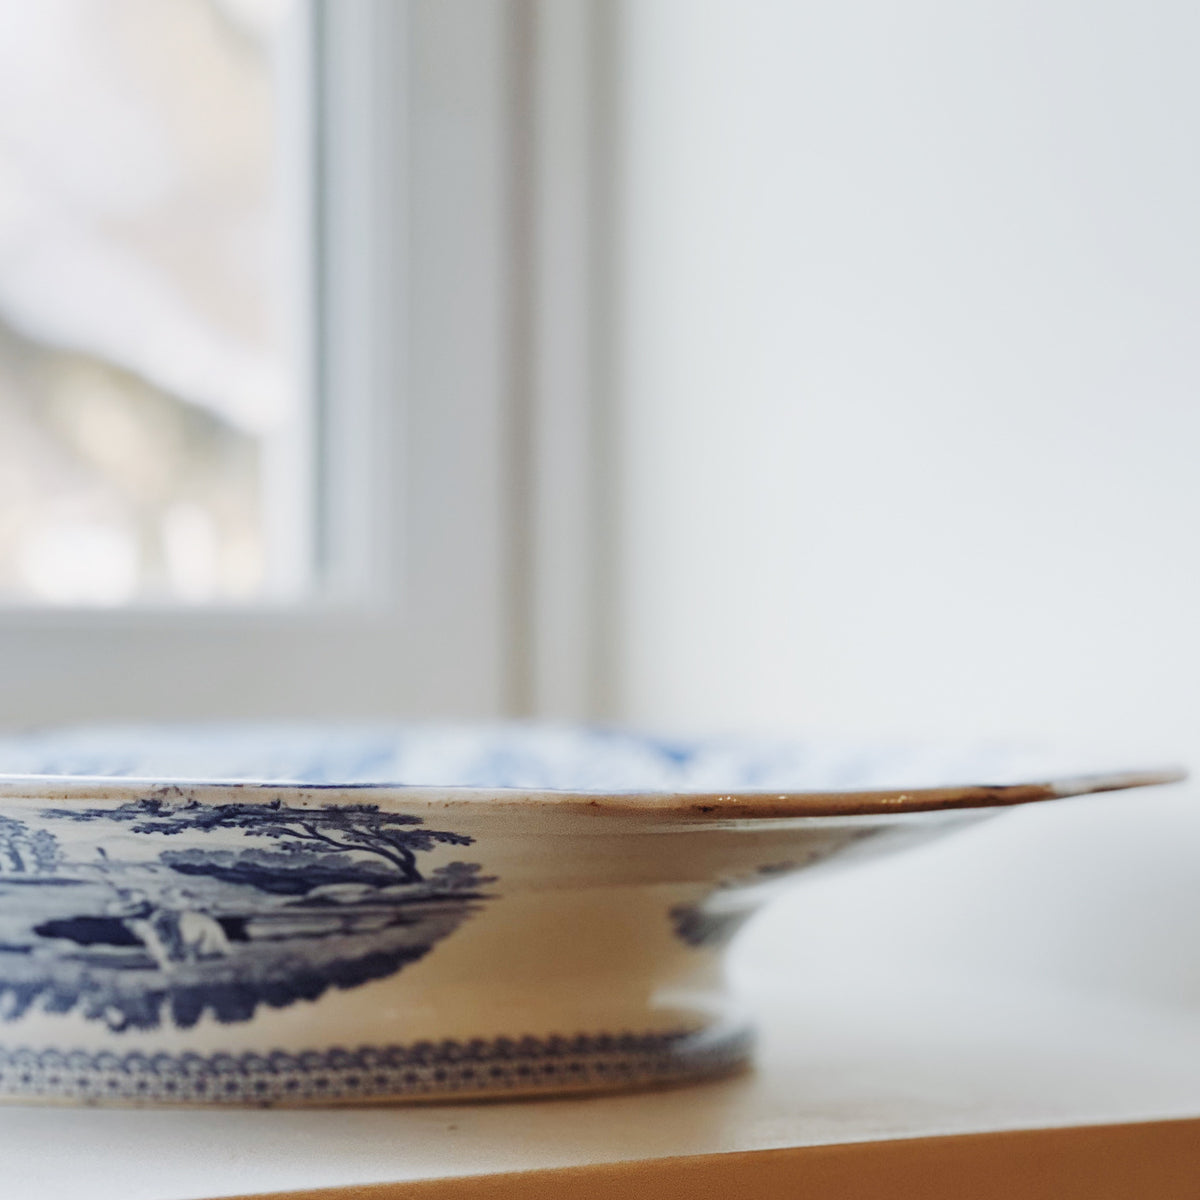 Antique Blue and White Platter